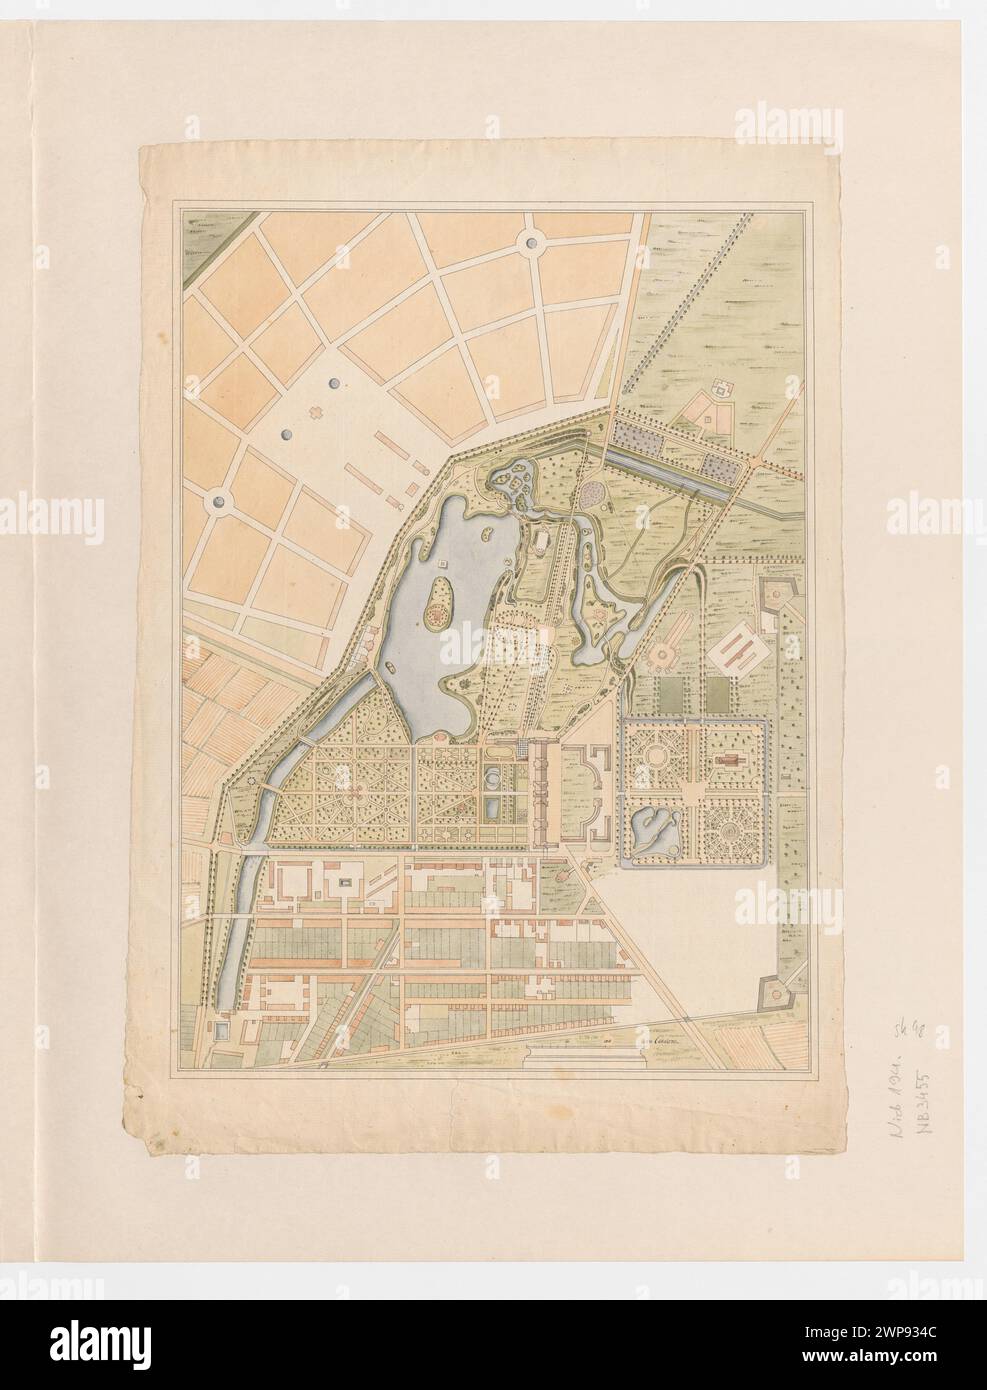 Tsarist siole. General plan of the residence;  around 1792 (1792-00-00-1793-00-00);Tsarist Sioło (Pushkin - palace and park complex), Nieborów - collection, places, parks (gardens), palaces (architect), plans, architectural plans, architectural drawing Stock Photo